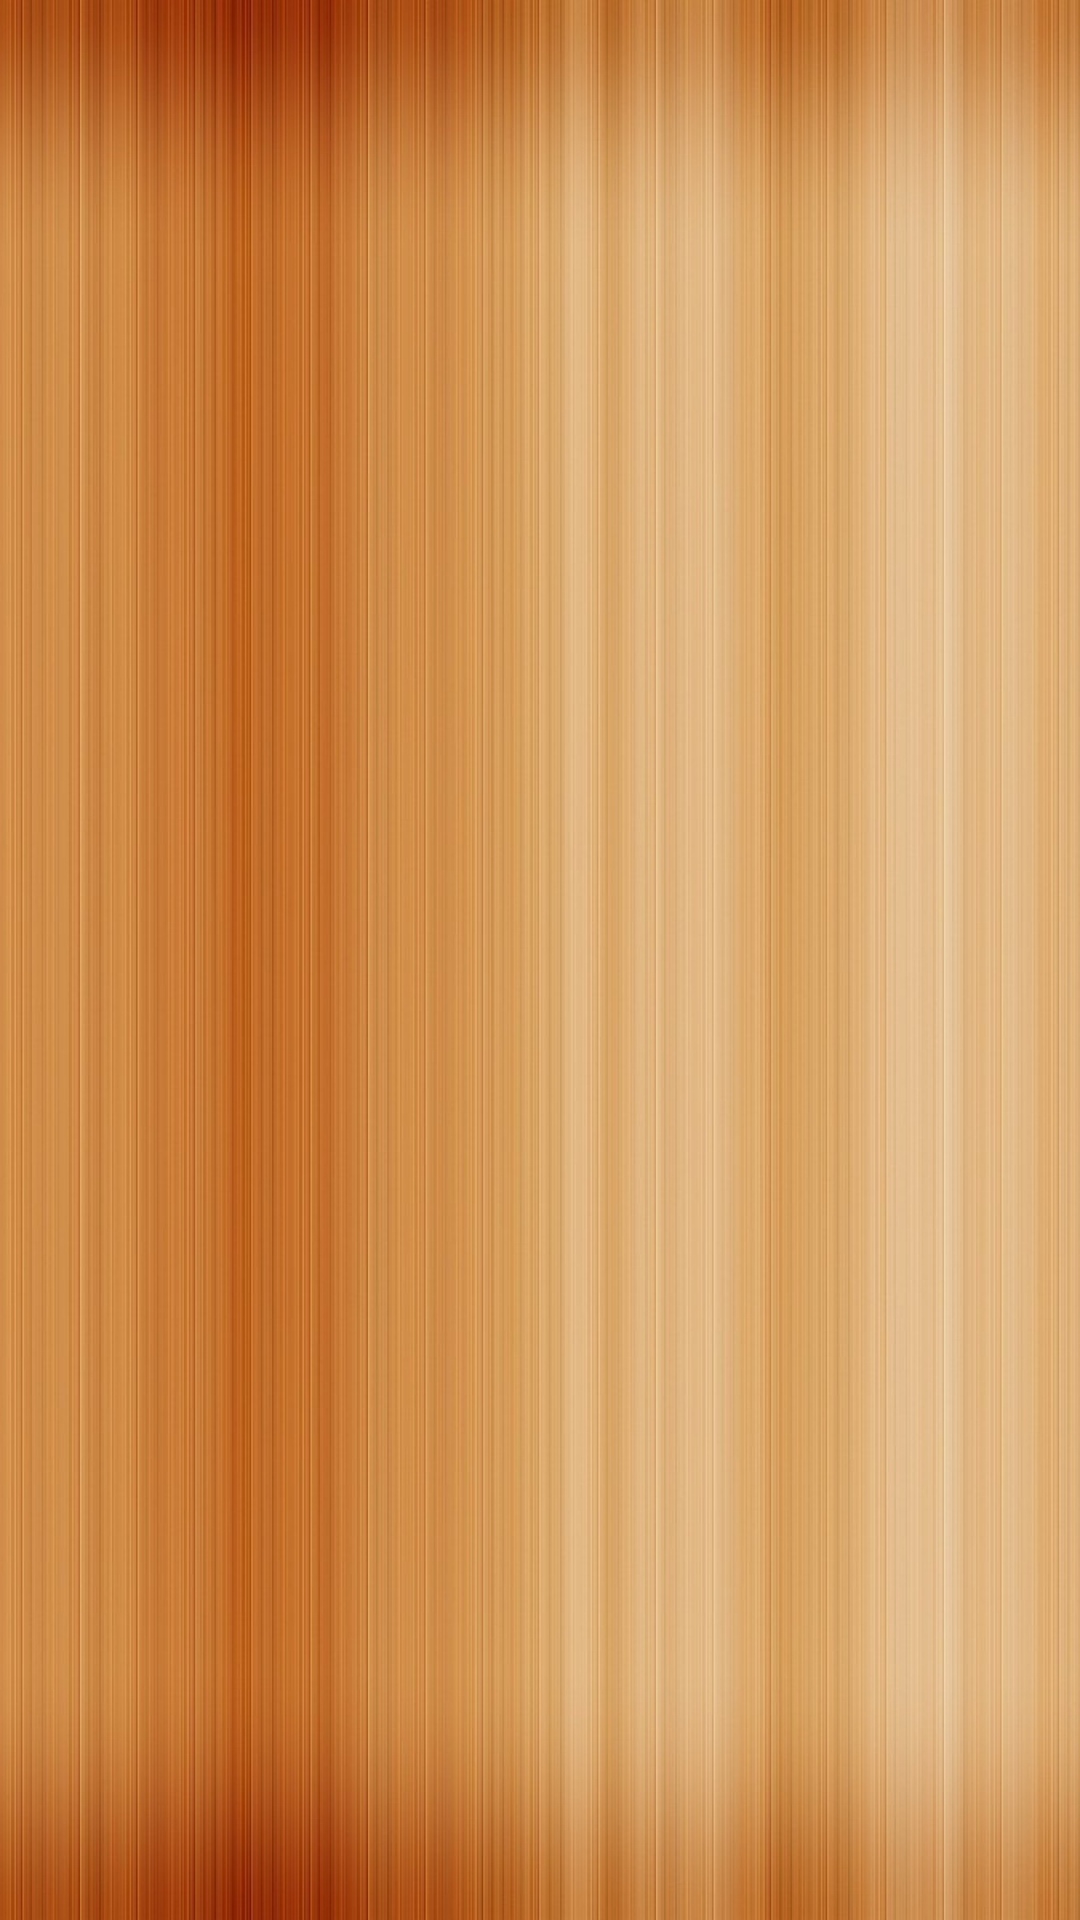 Wallpaper Lines Vertical Wood Background Sony